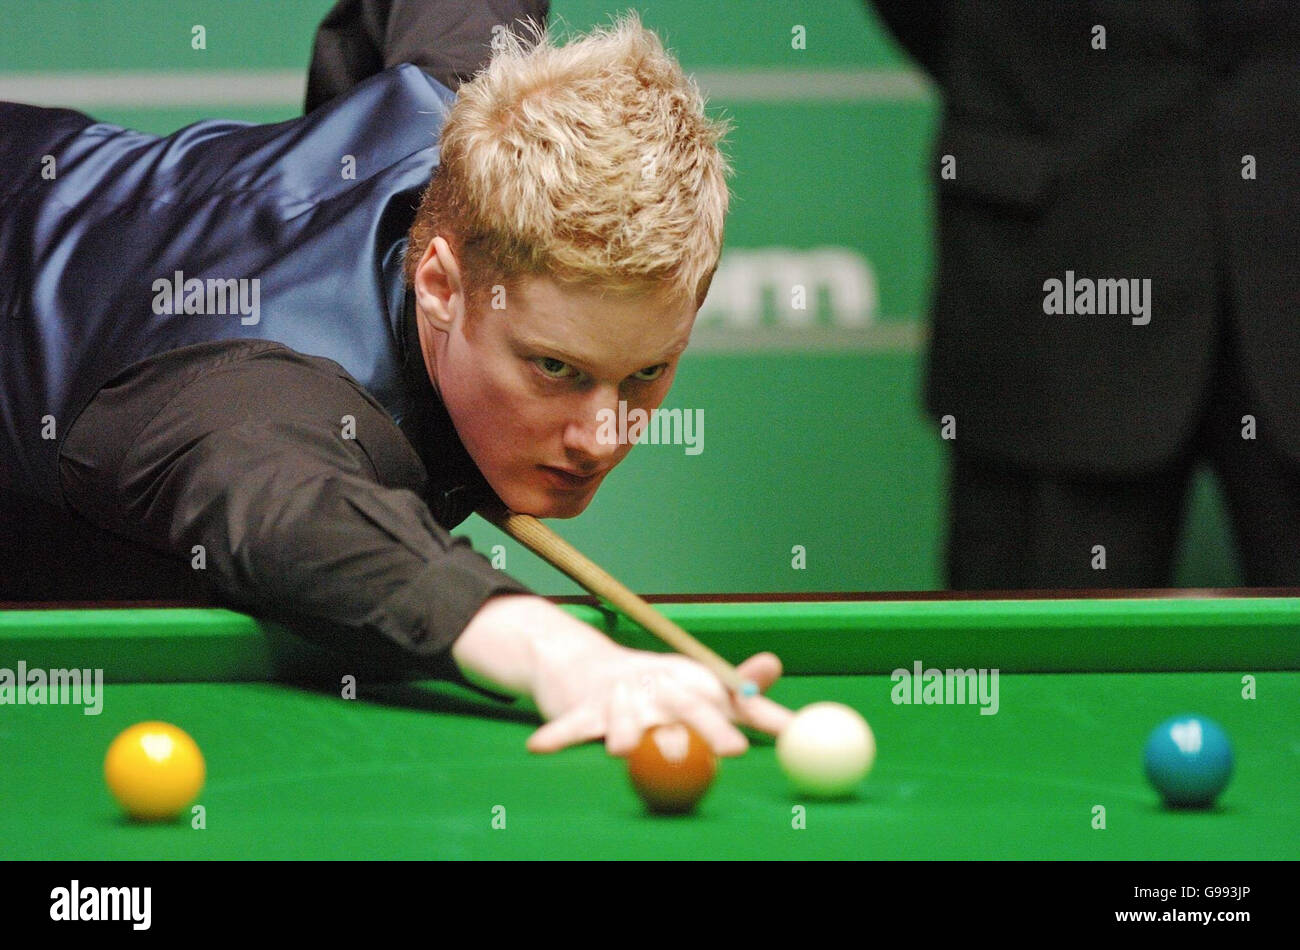 Neil Robertson in action against Paul Hunter during the first round of the World Snooker Championship at The Crucible Theatre, Sheffield. Stock Photo